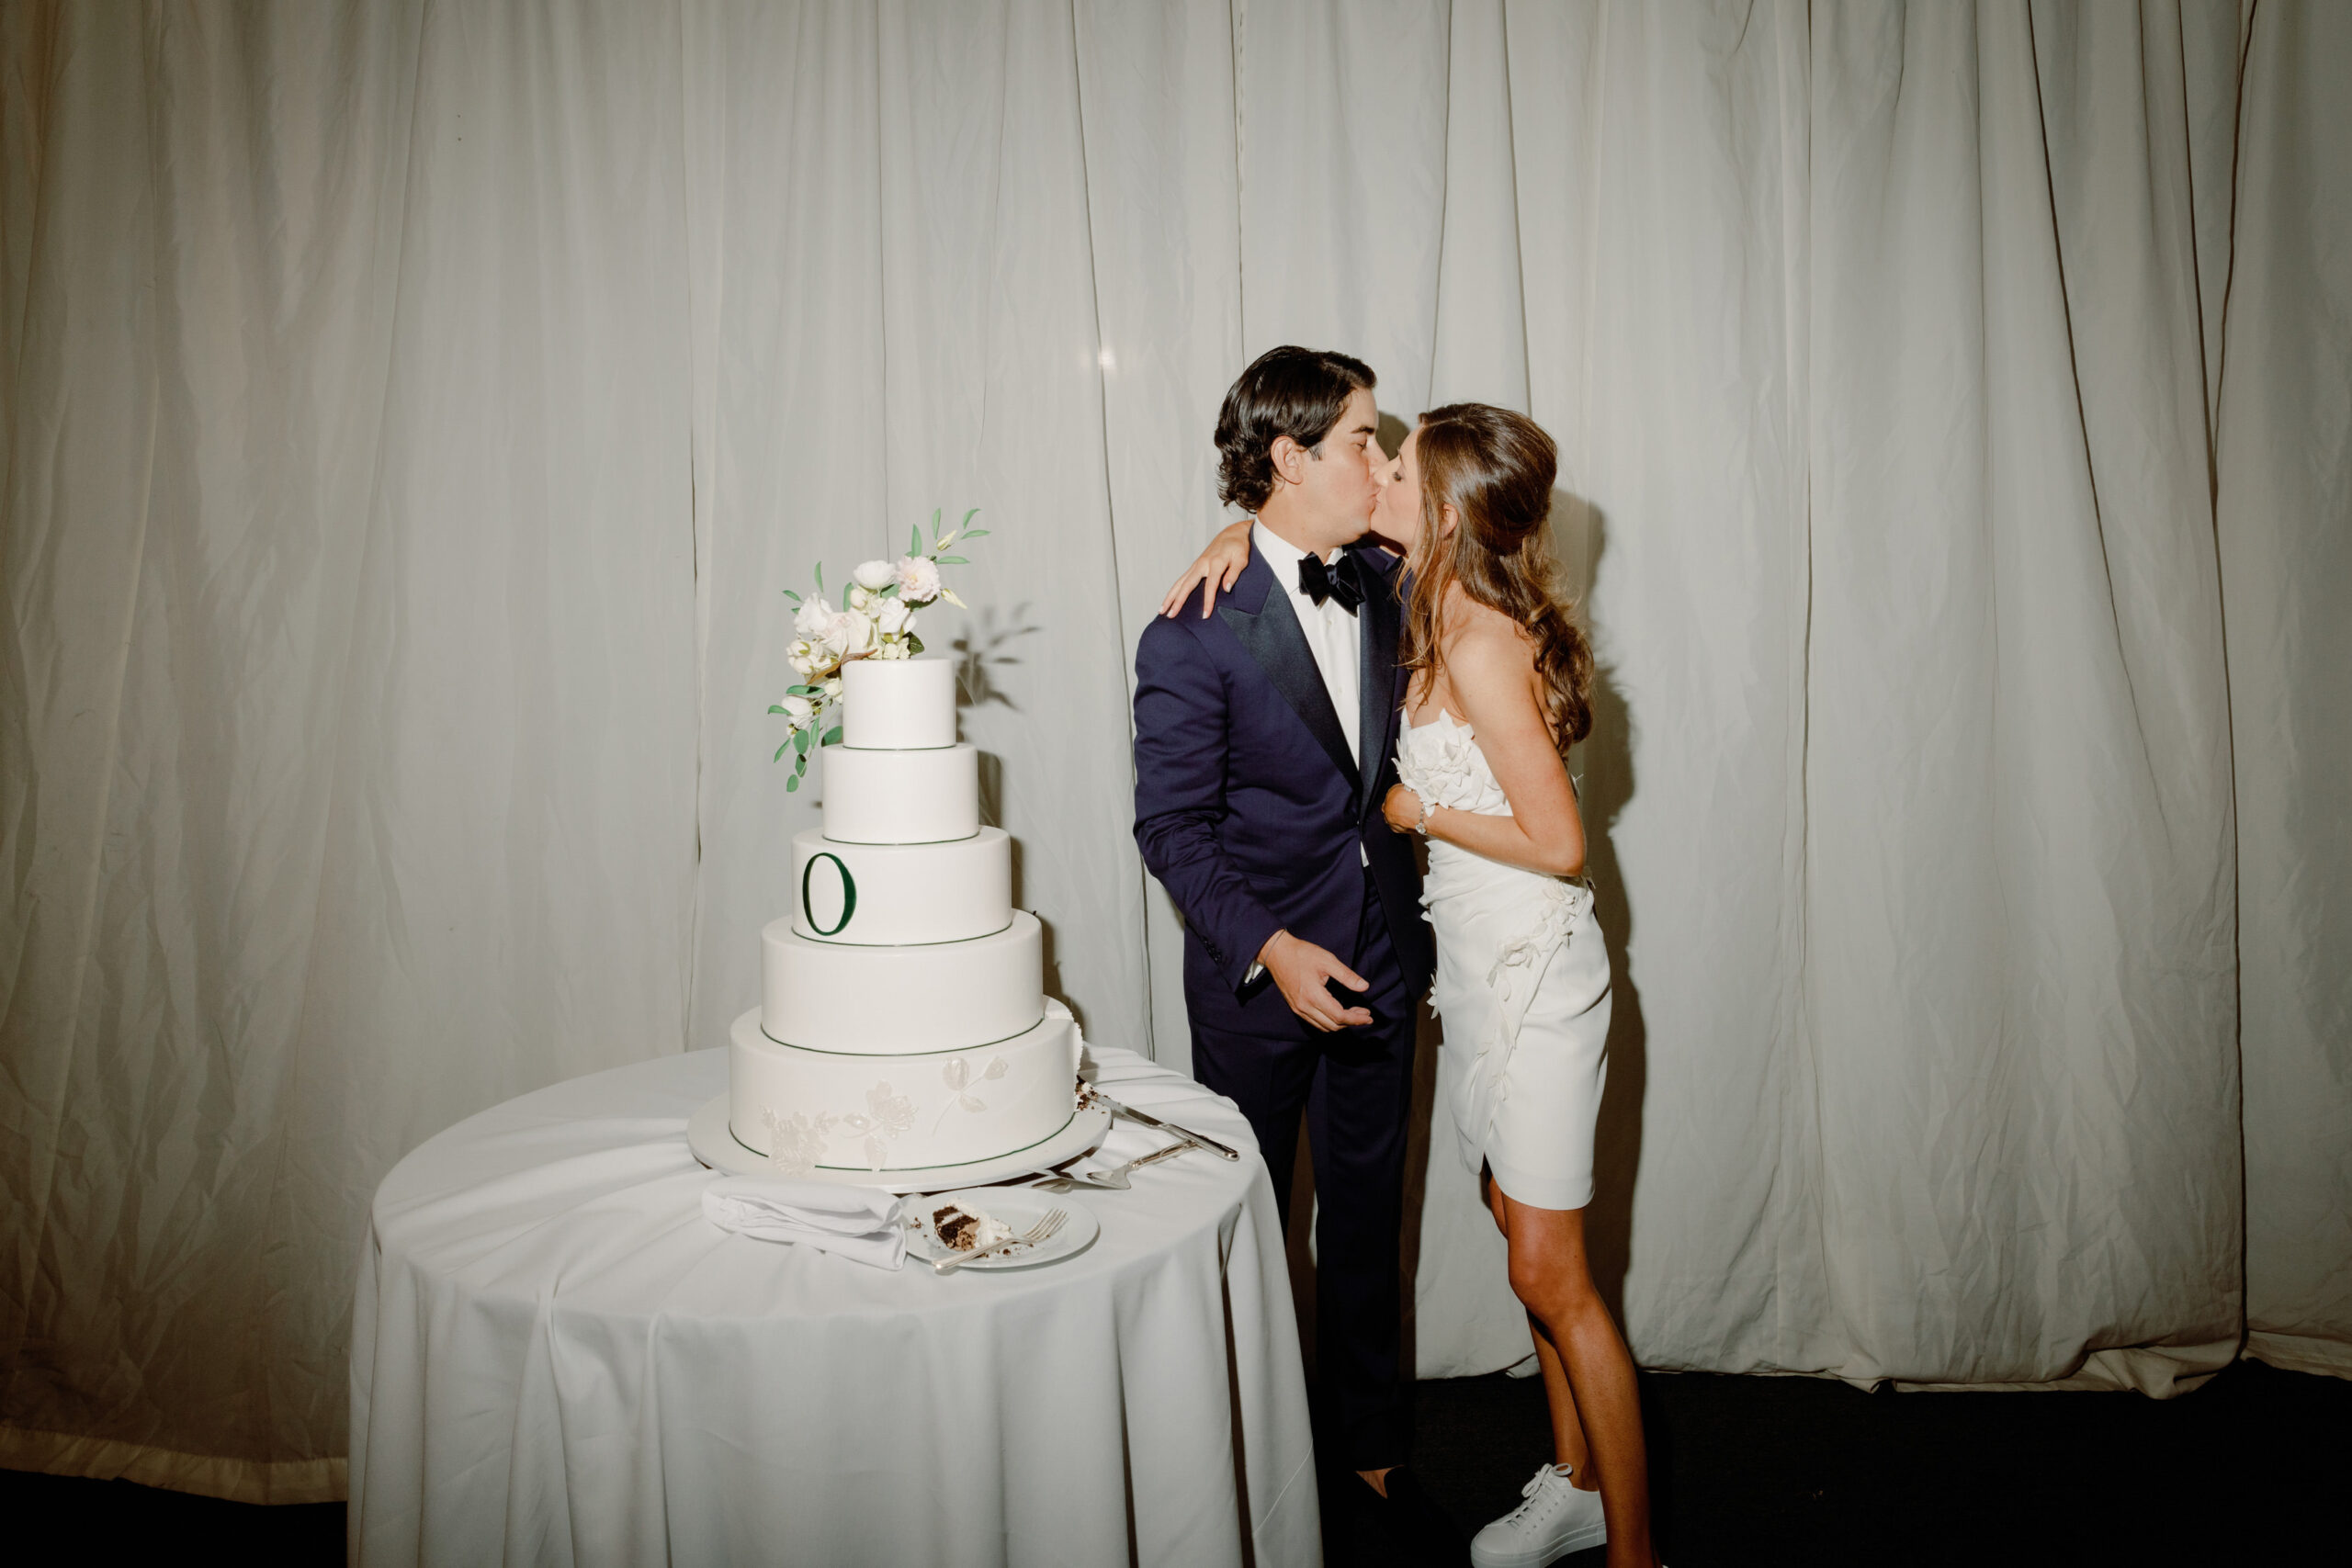 The bride and groom are kissing in the cake cutting ceremony. Image by Jenny Fu Studio